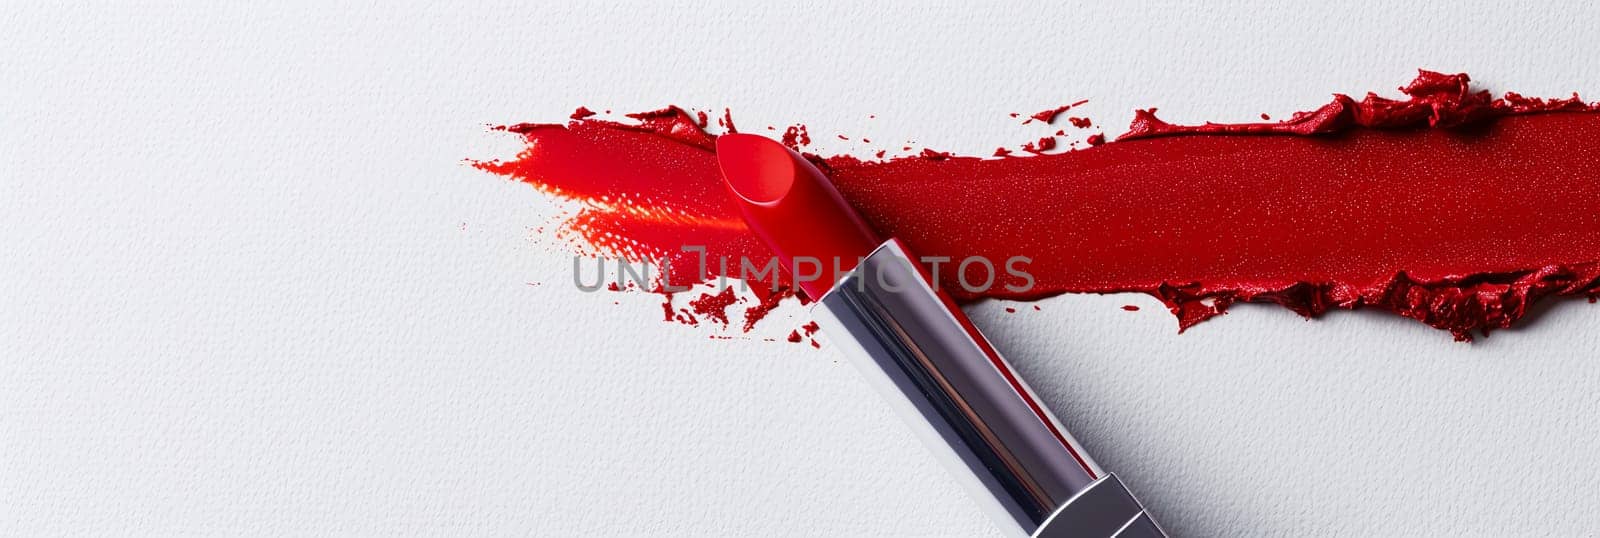 A vibrant red lipstick leaves a bold swatch on a pristine white surface.